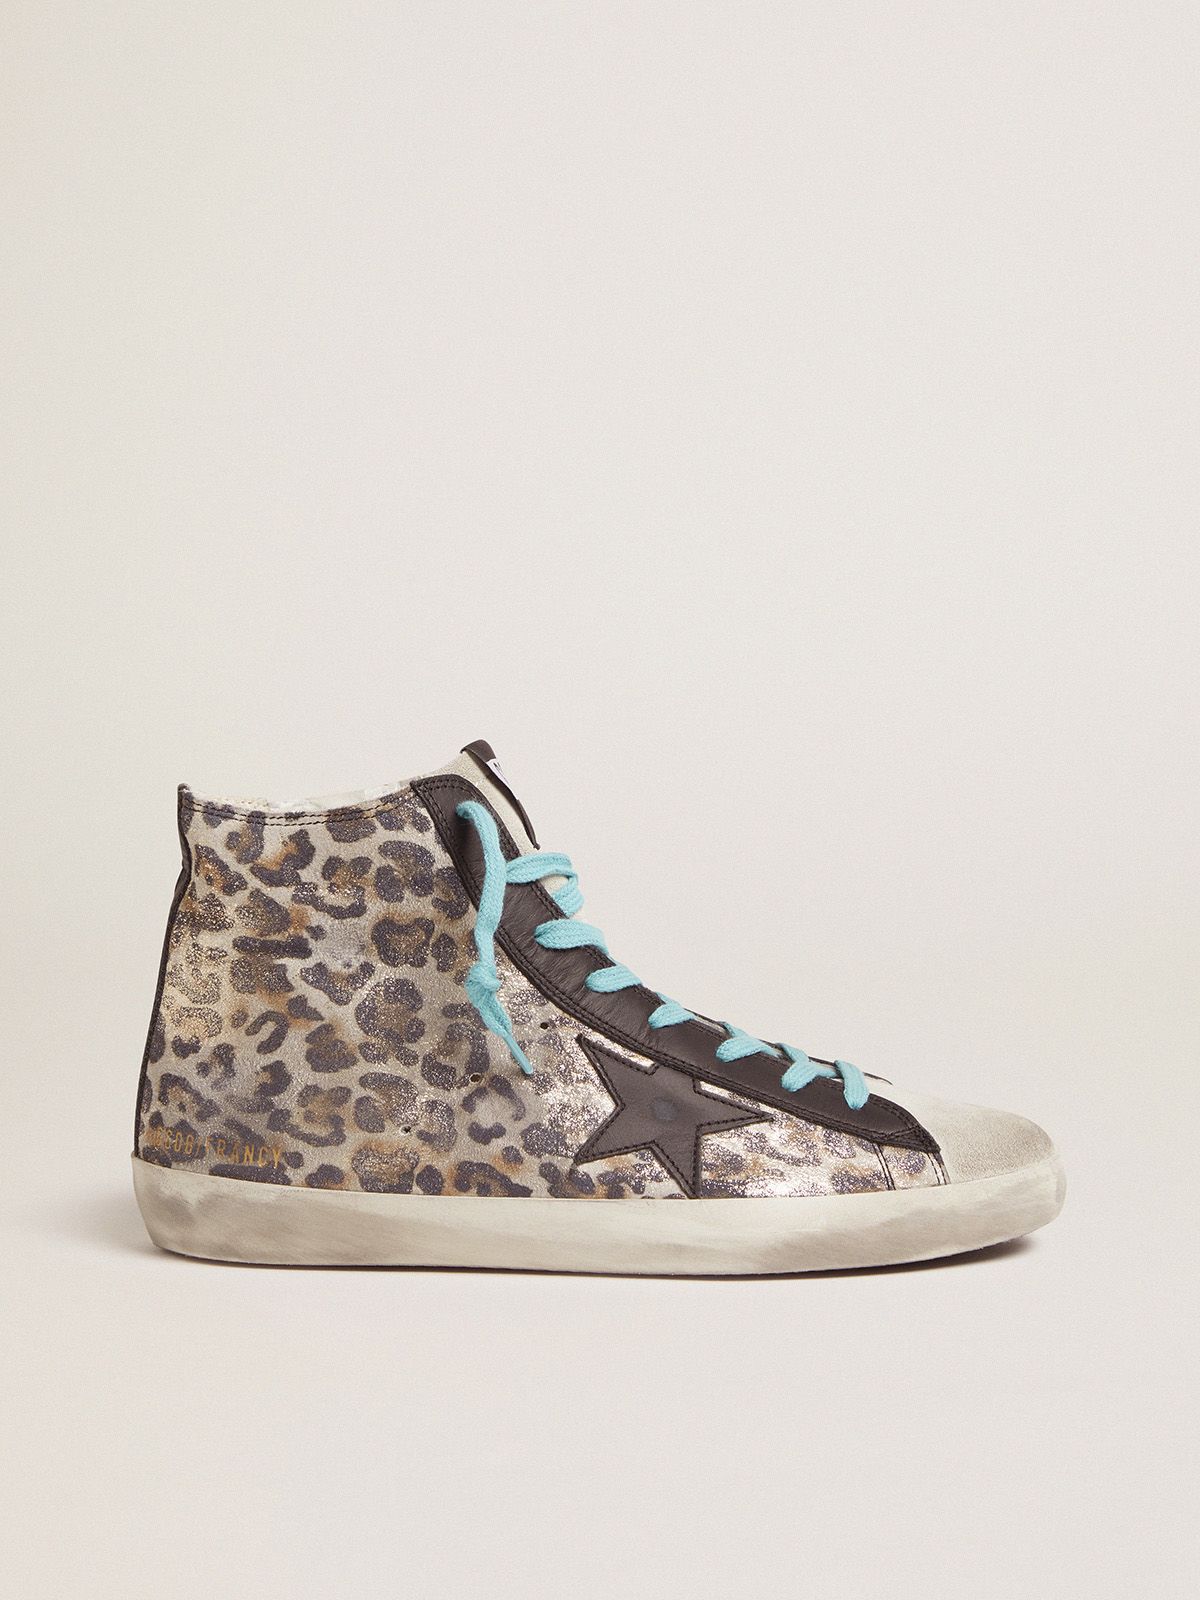 Leopard-print Francy sneakers with blue laces | 